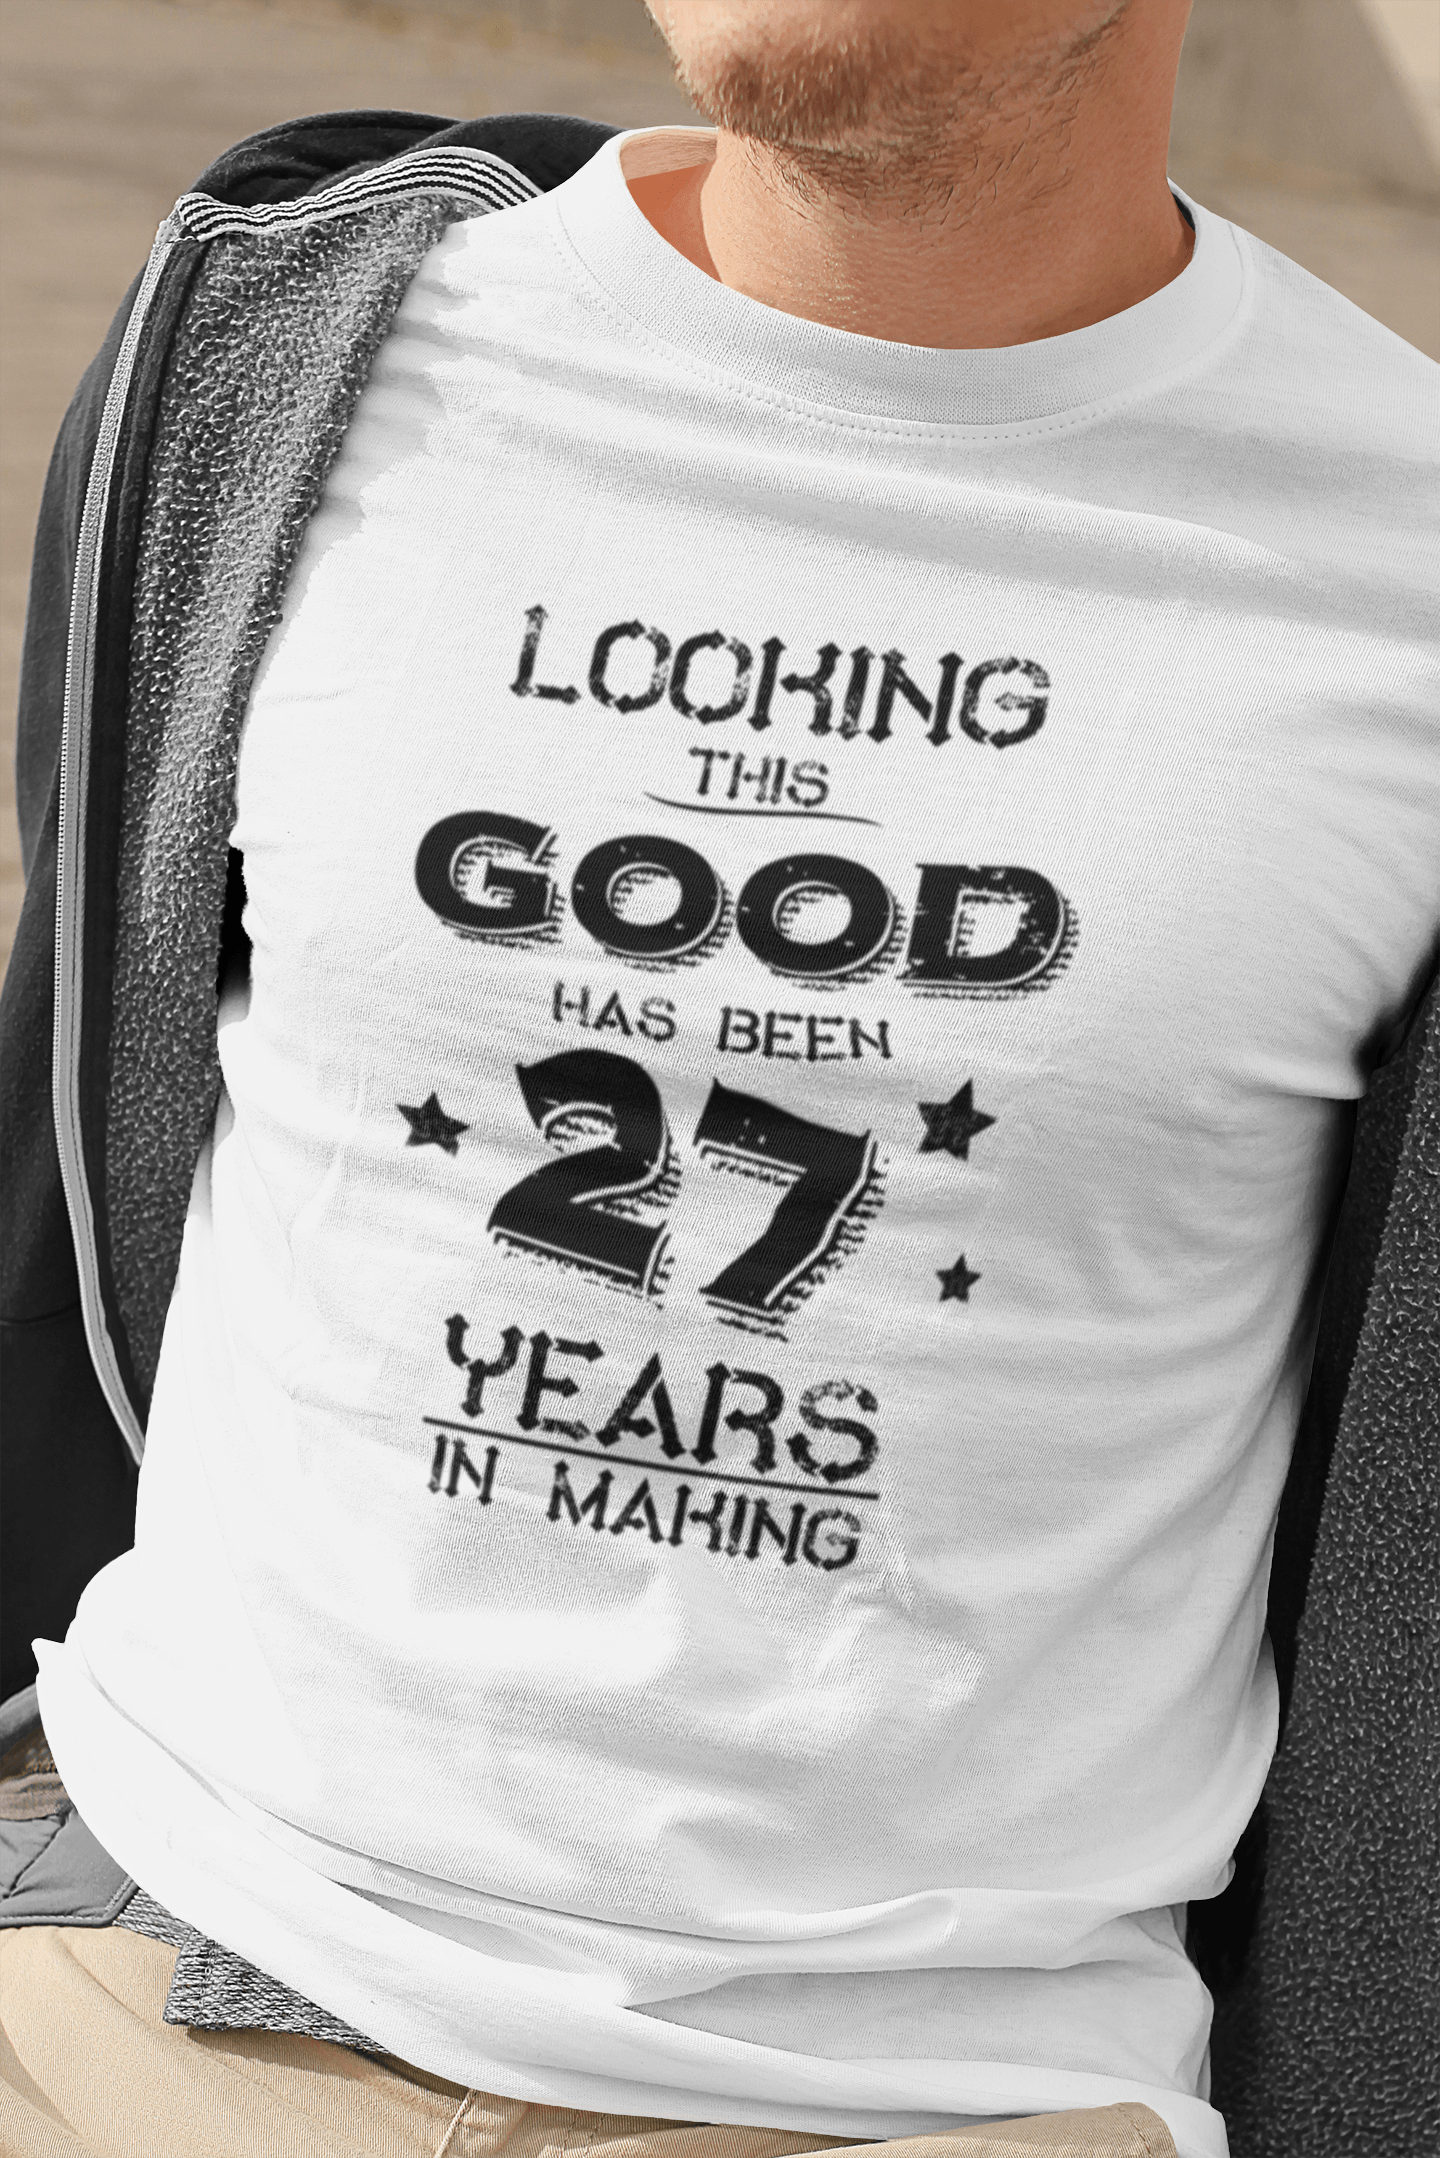 Looking This Good Has Been 27 Years is Making T-shirt homme blanc cadeau d'anniversaire 00438